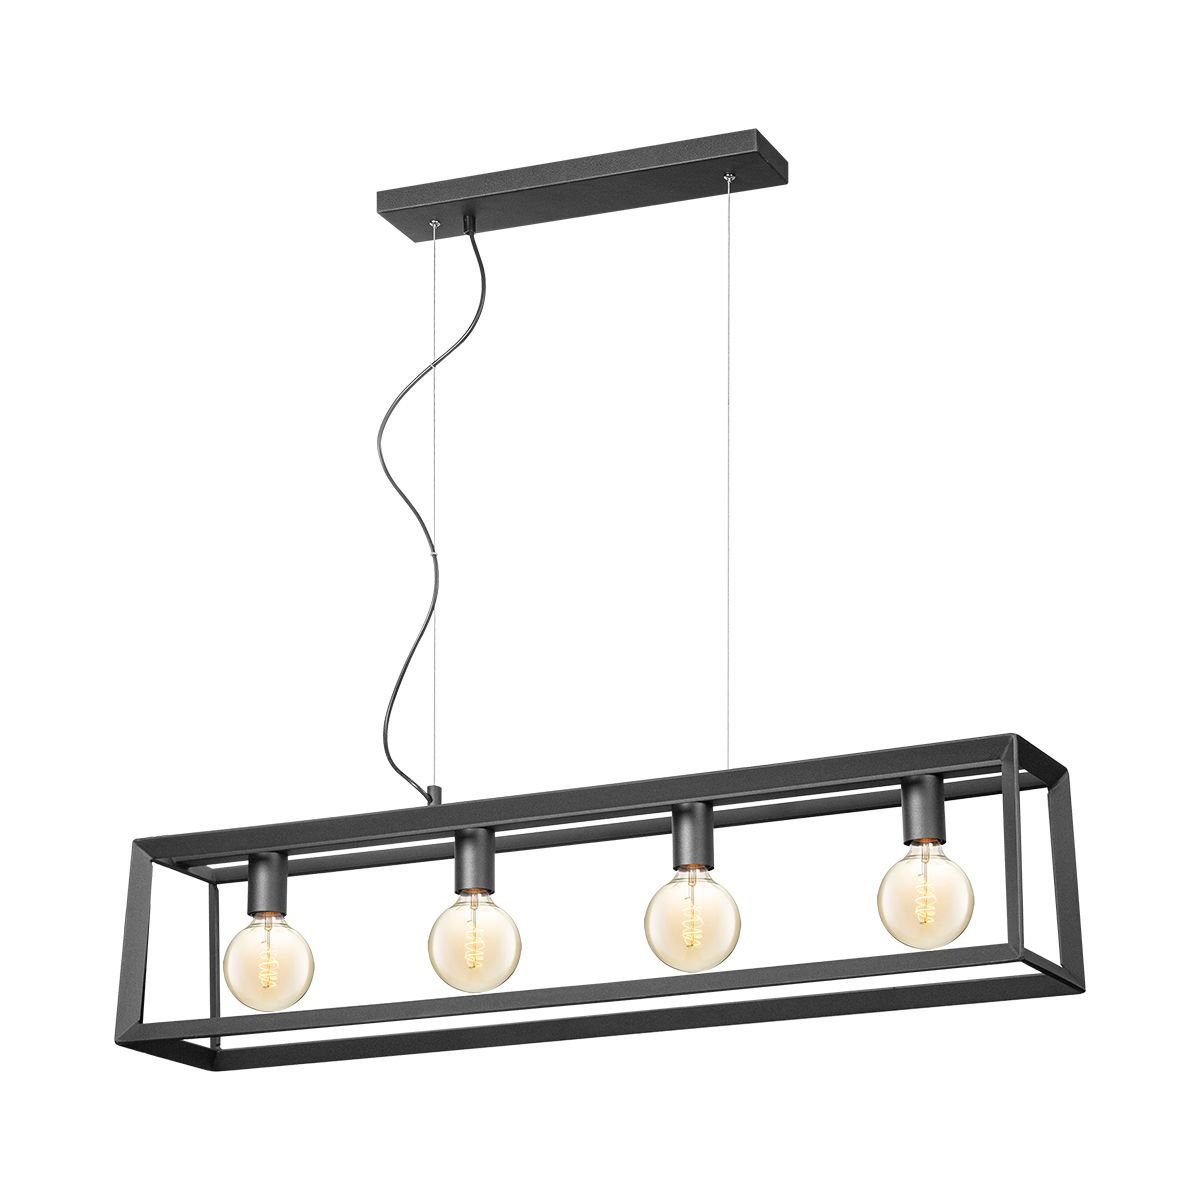 Home Sweet Home Dito Square 4 Light Hanging Lamp Black